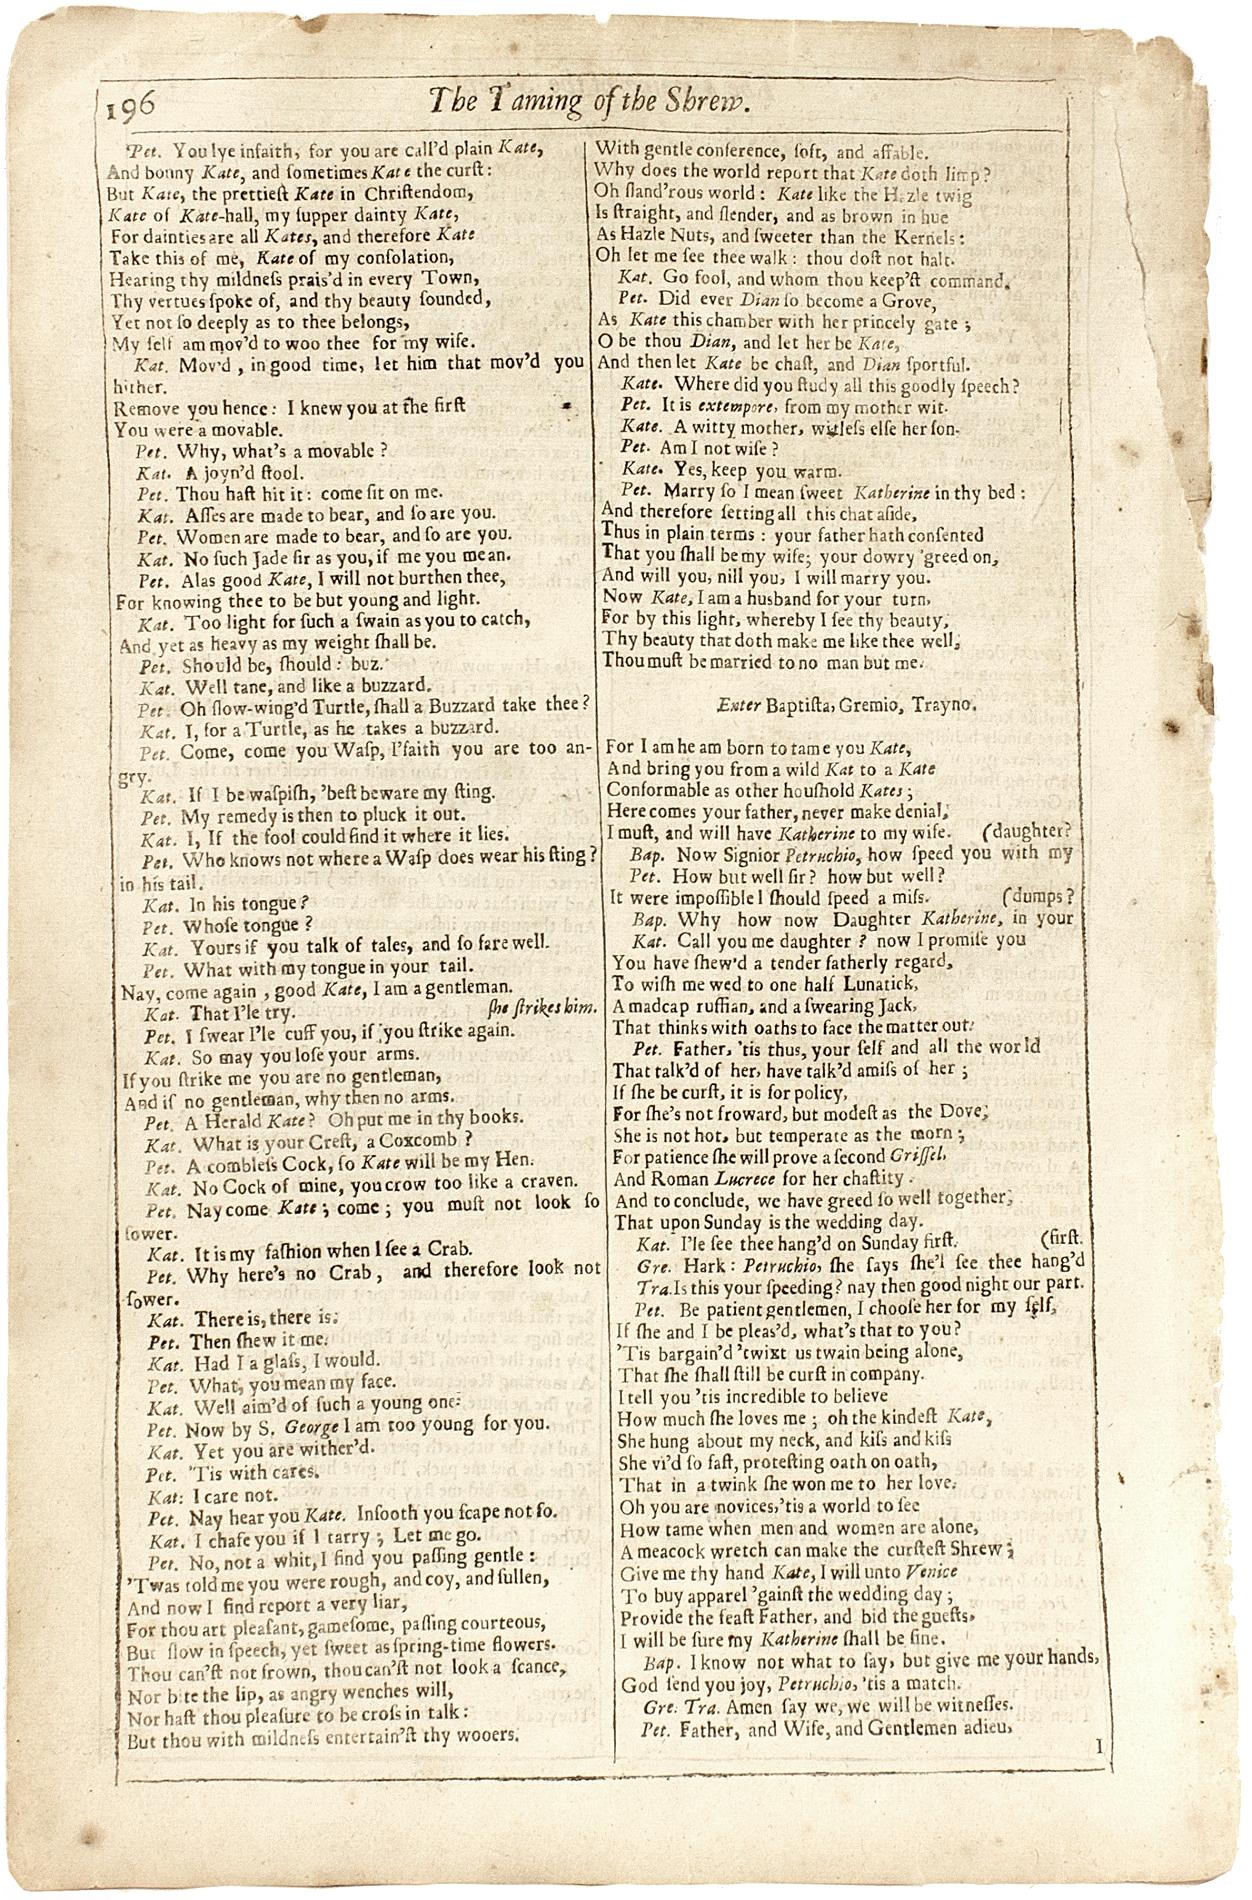 Late 17th Century Shakespeare. The Taming of the Shrew - FOURTH FOLIO - 1685 - page 195-196